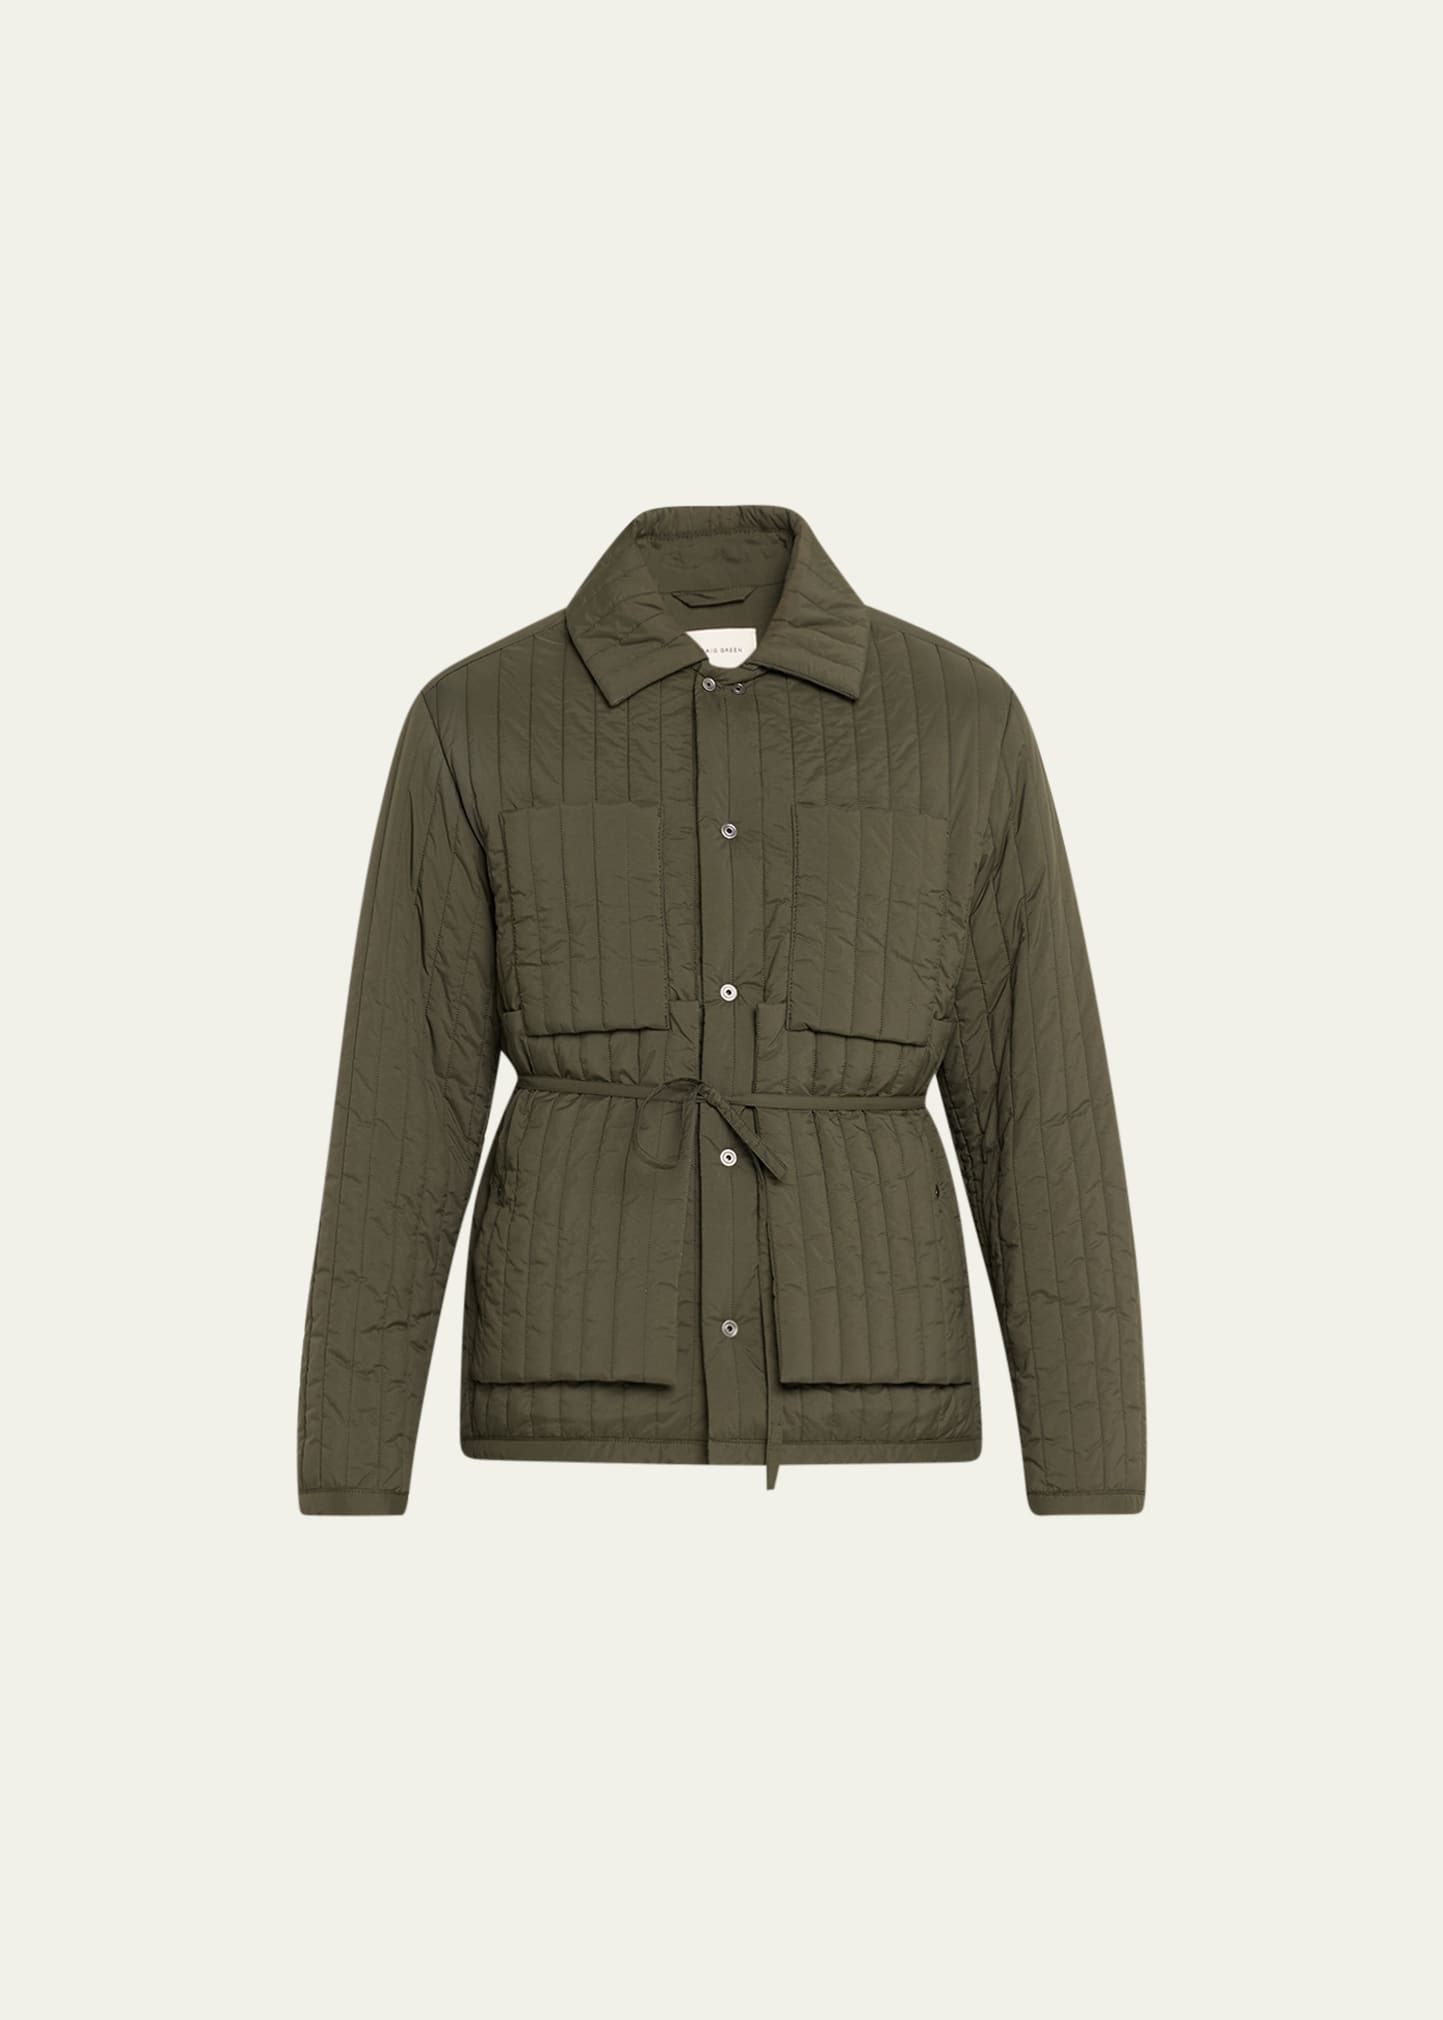 Craig Green Men's Classic Quilted Worker Jacket In Olive